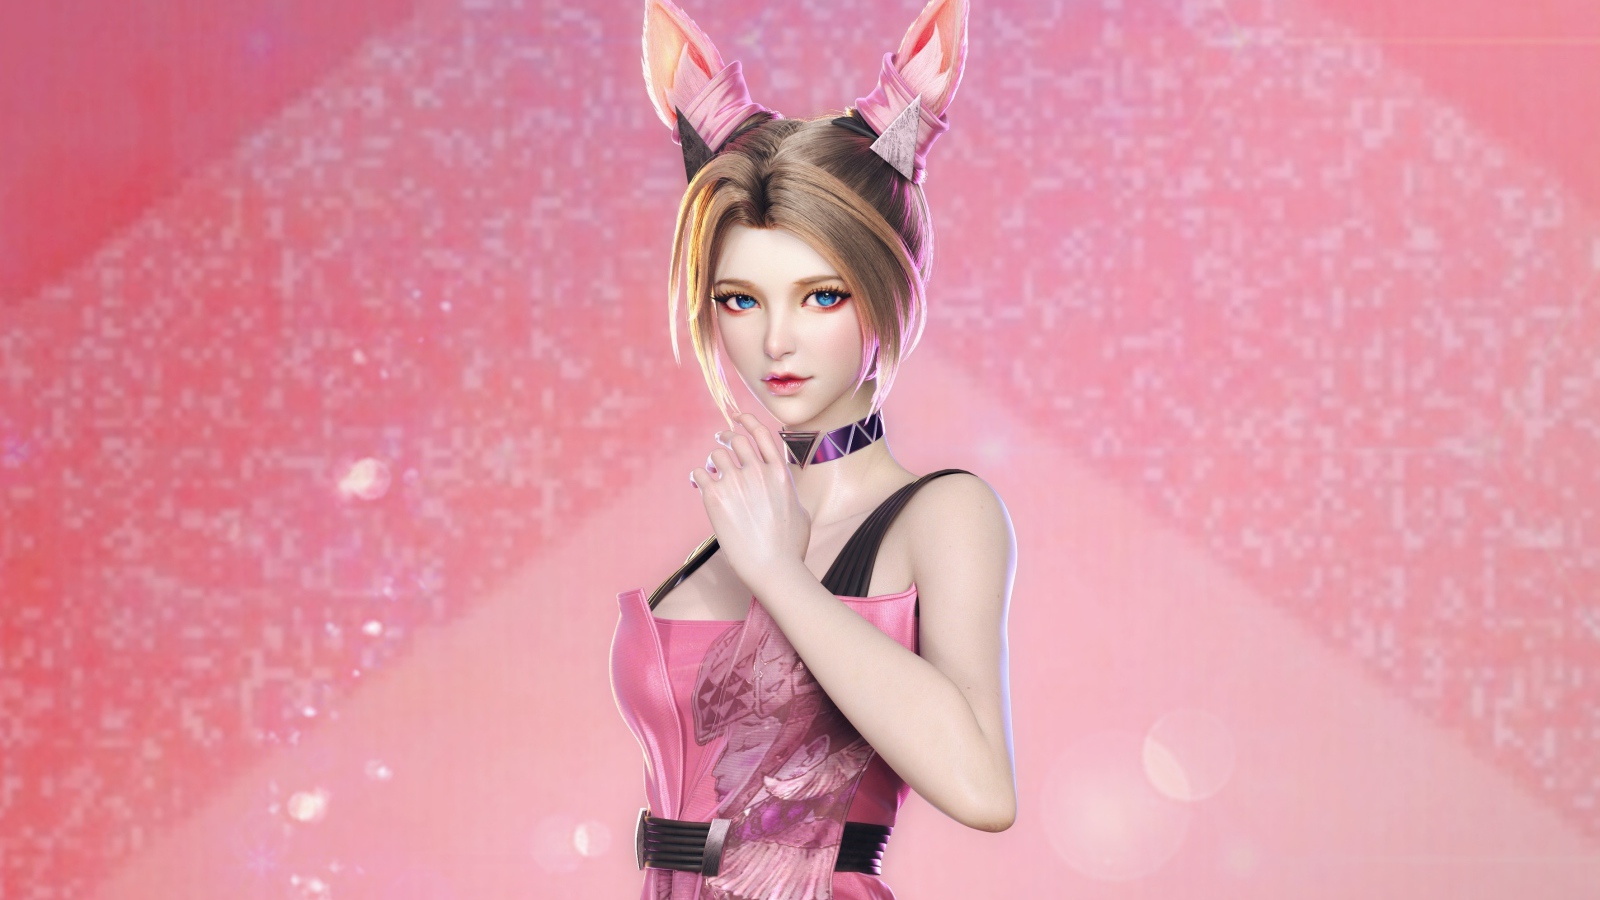 Anime girl with squirrel ears on a pink background